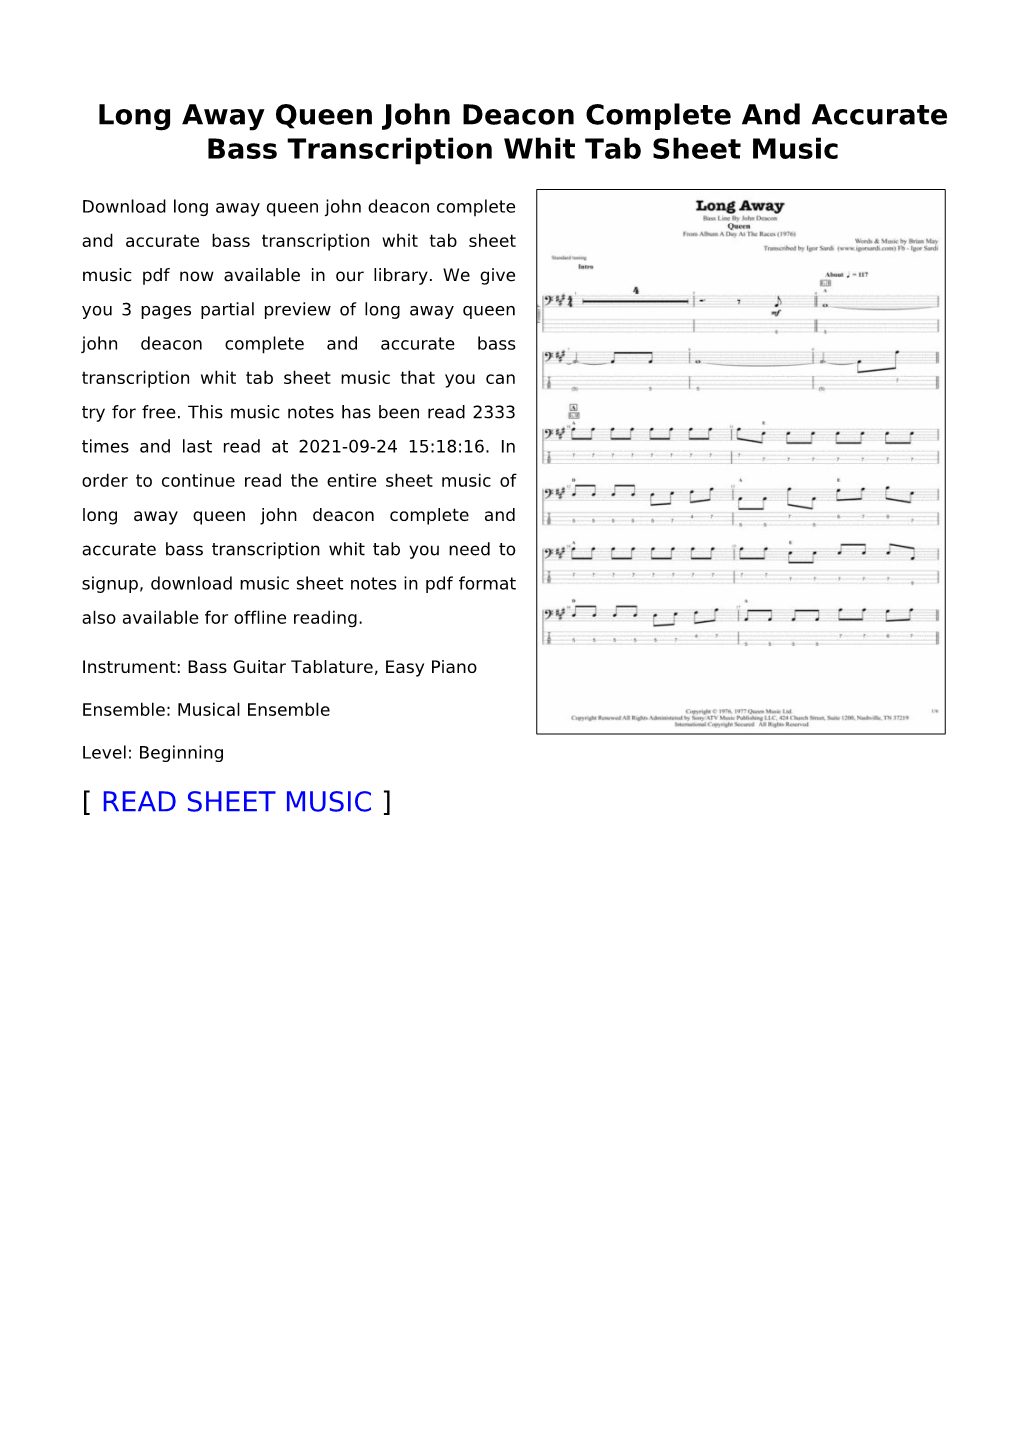 Long Away Queen John Deacon Complete and Accurate Bass Transcription Whit Tab Sheet Music